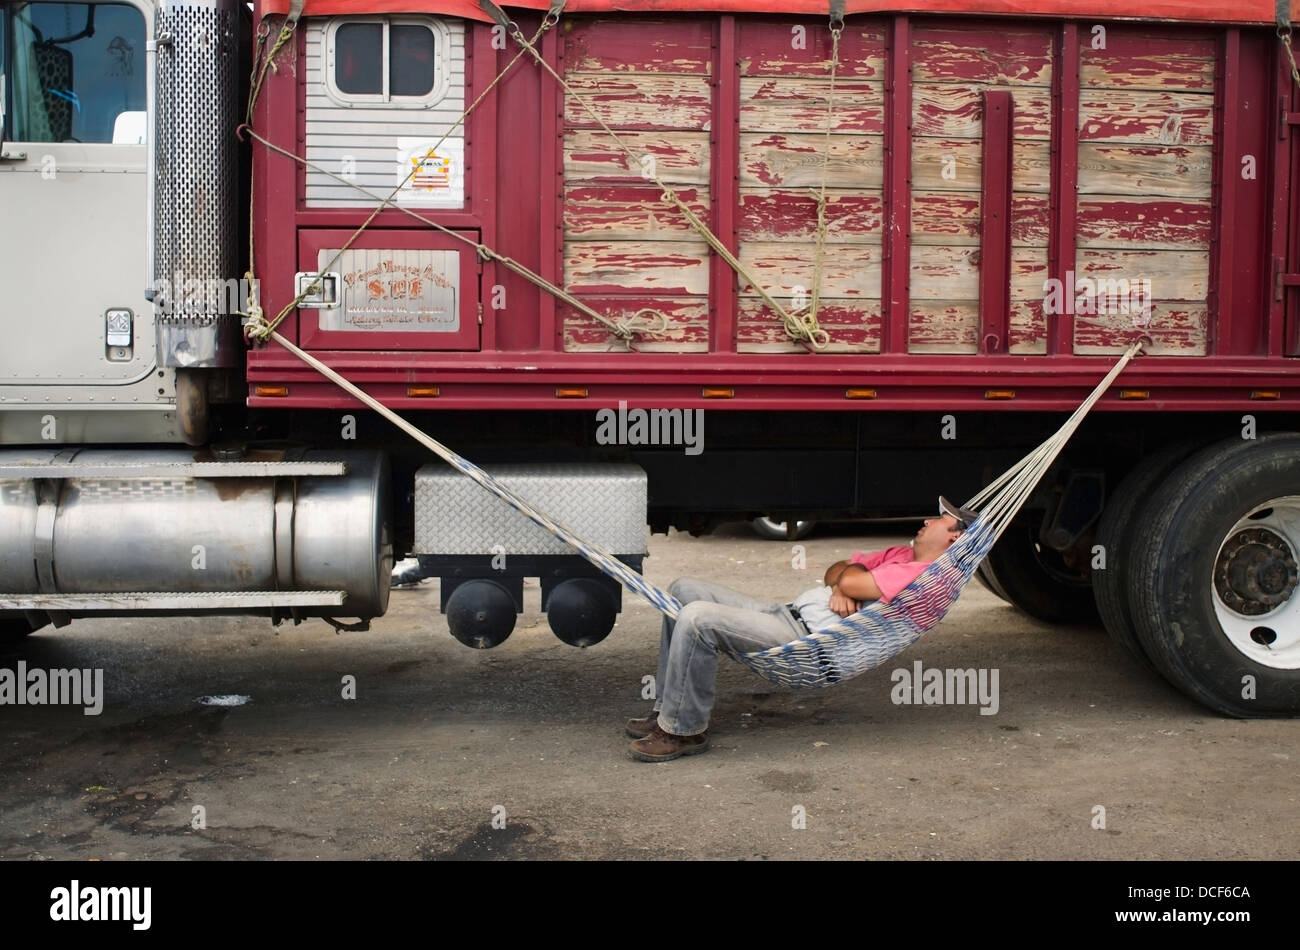 Truck driver sleeping in hammock attached to his truck; Aguascalientes, Mexico Stock Photo